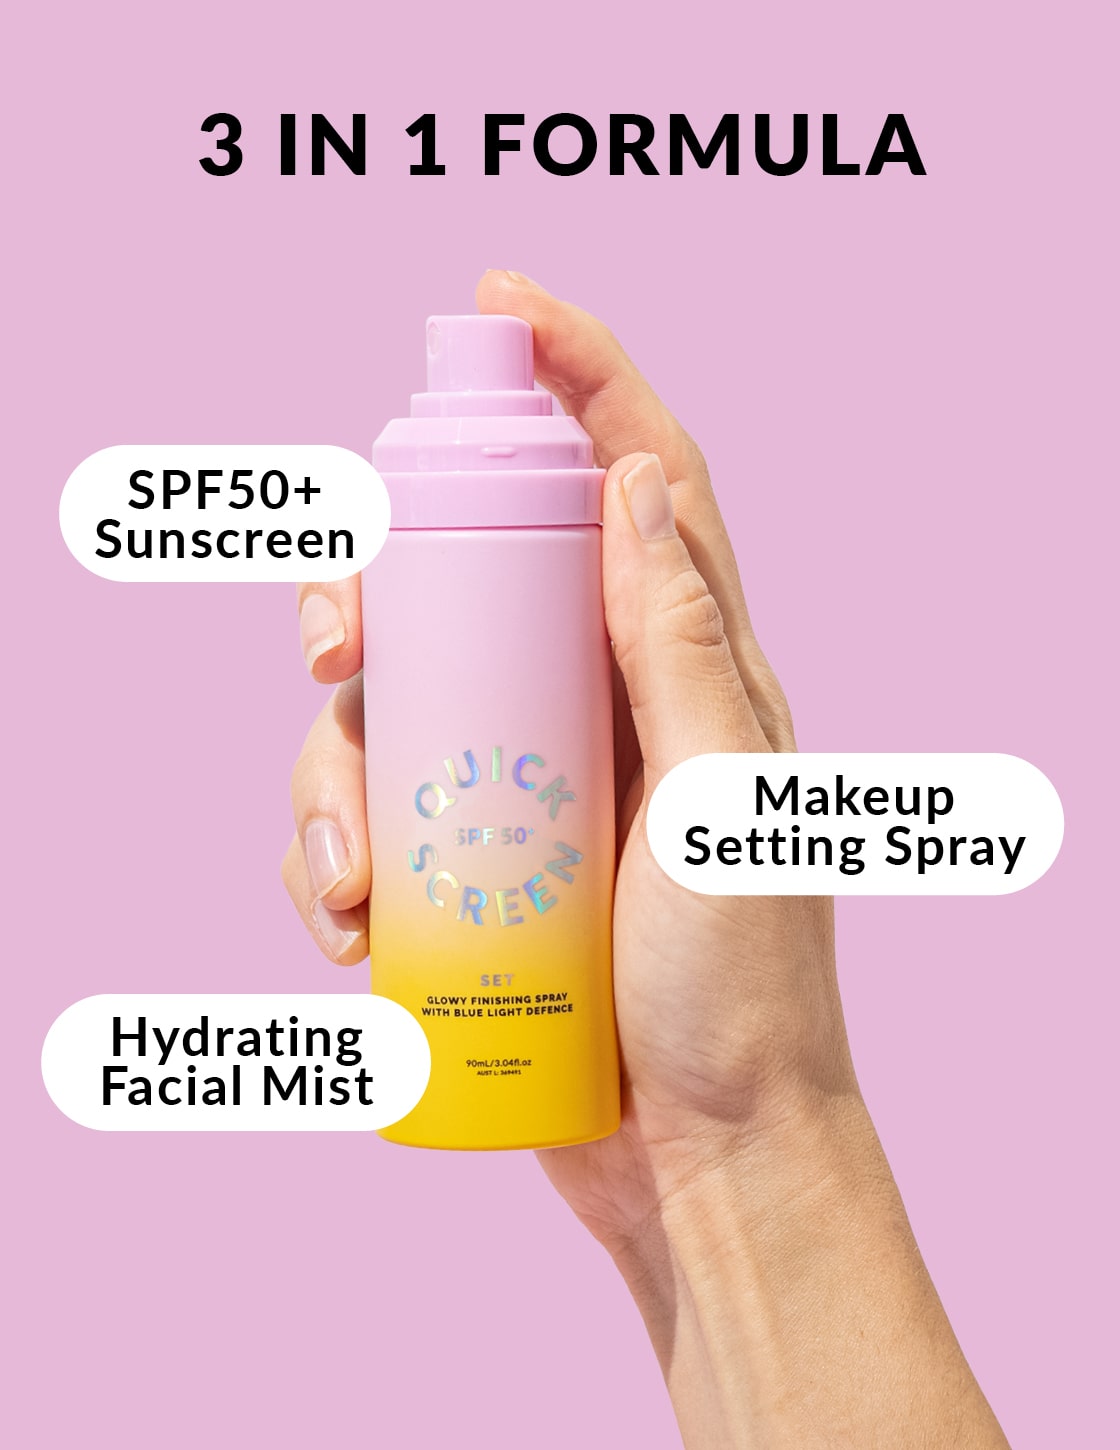 The Flick Quick Screen SPF 50+ Set Finishing Spray with Blue Light Defence